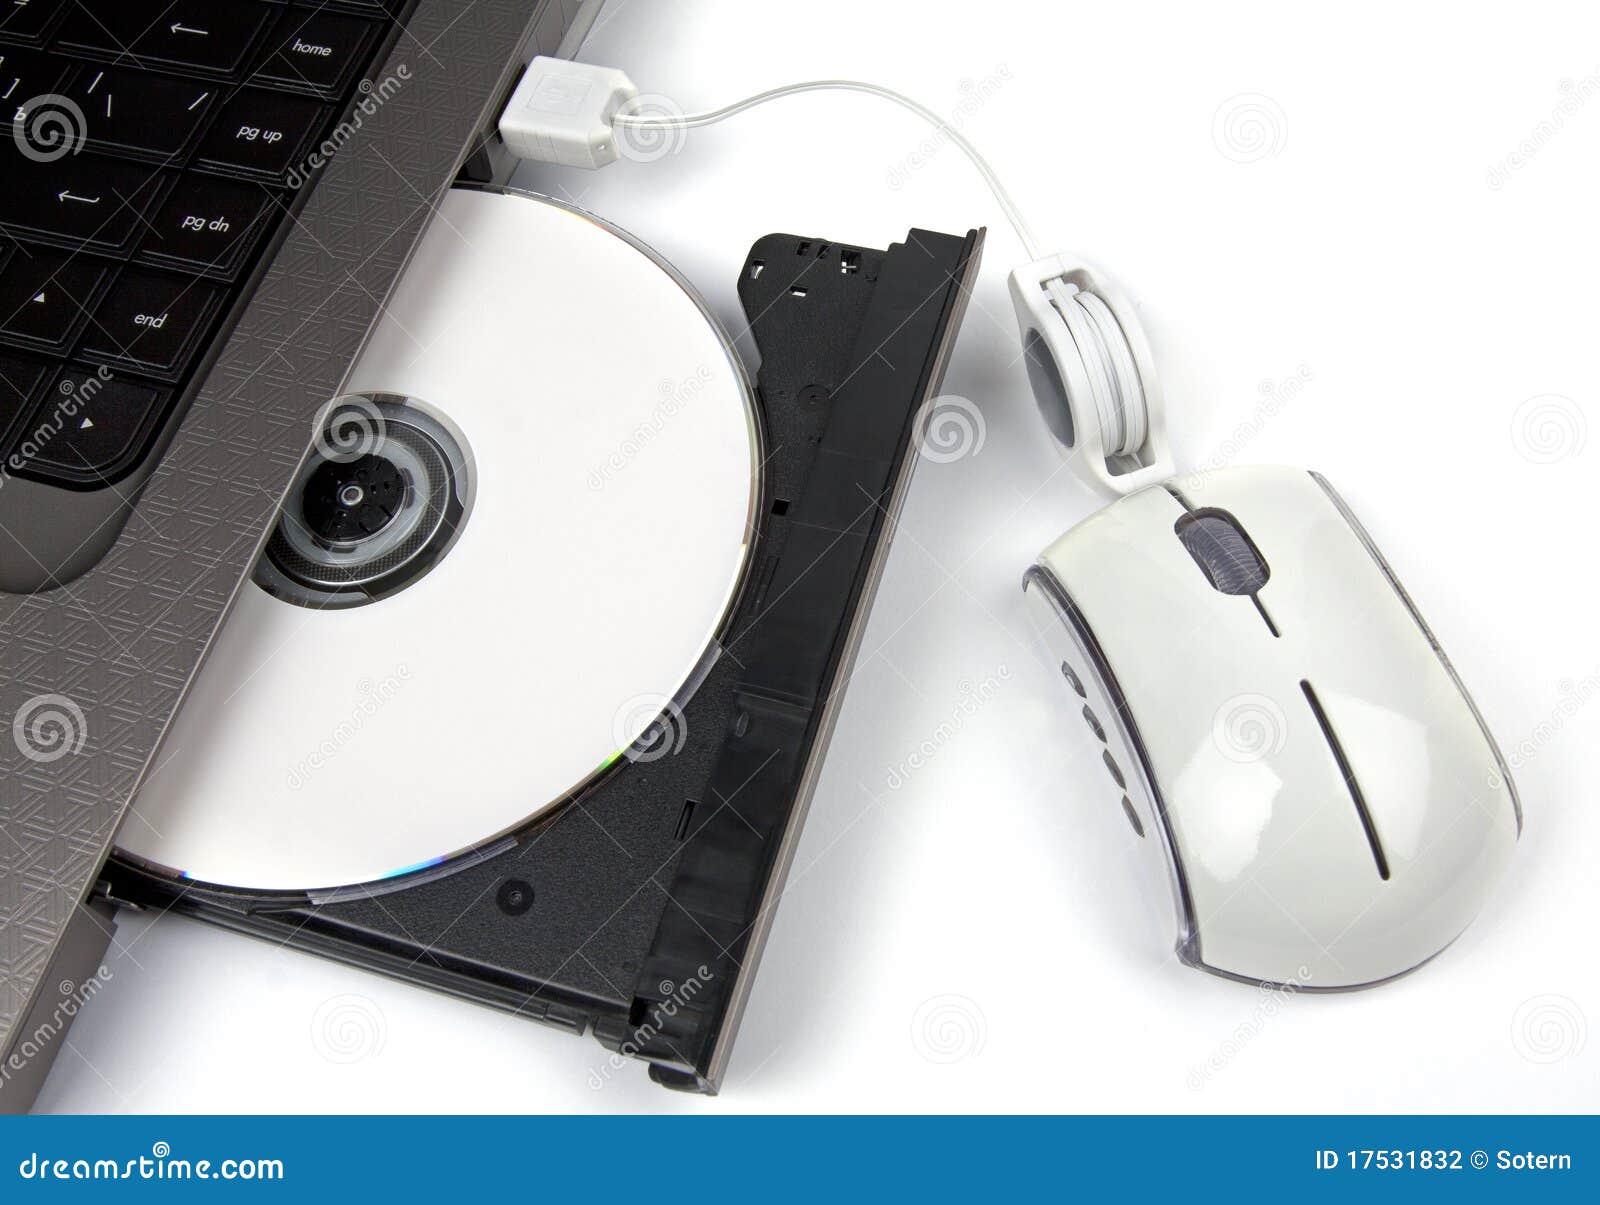 how to eject a cd from external player from laptop